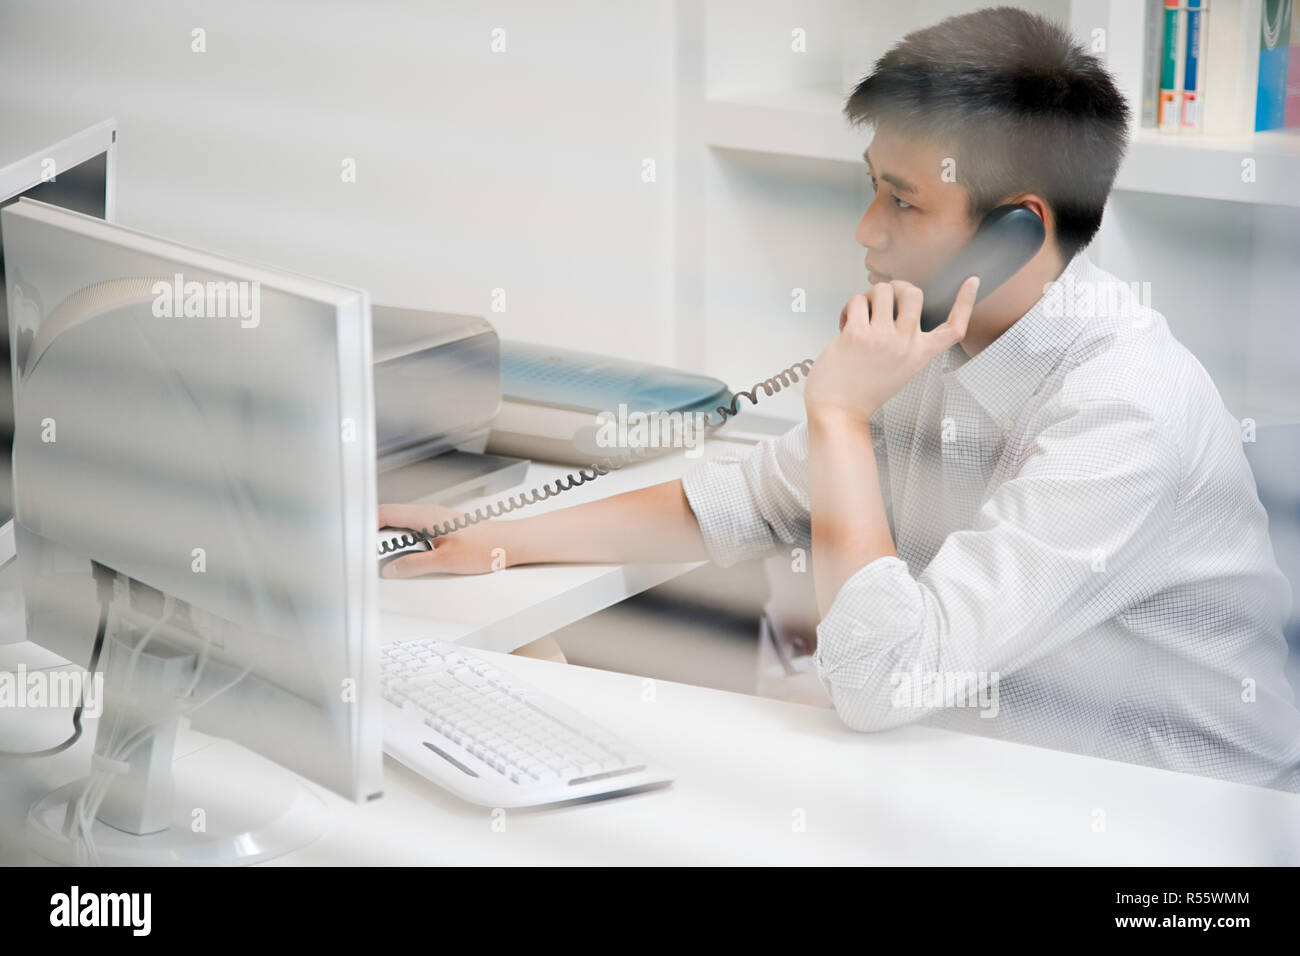 Man working in office Stock Photo